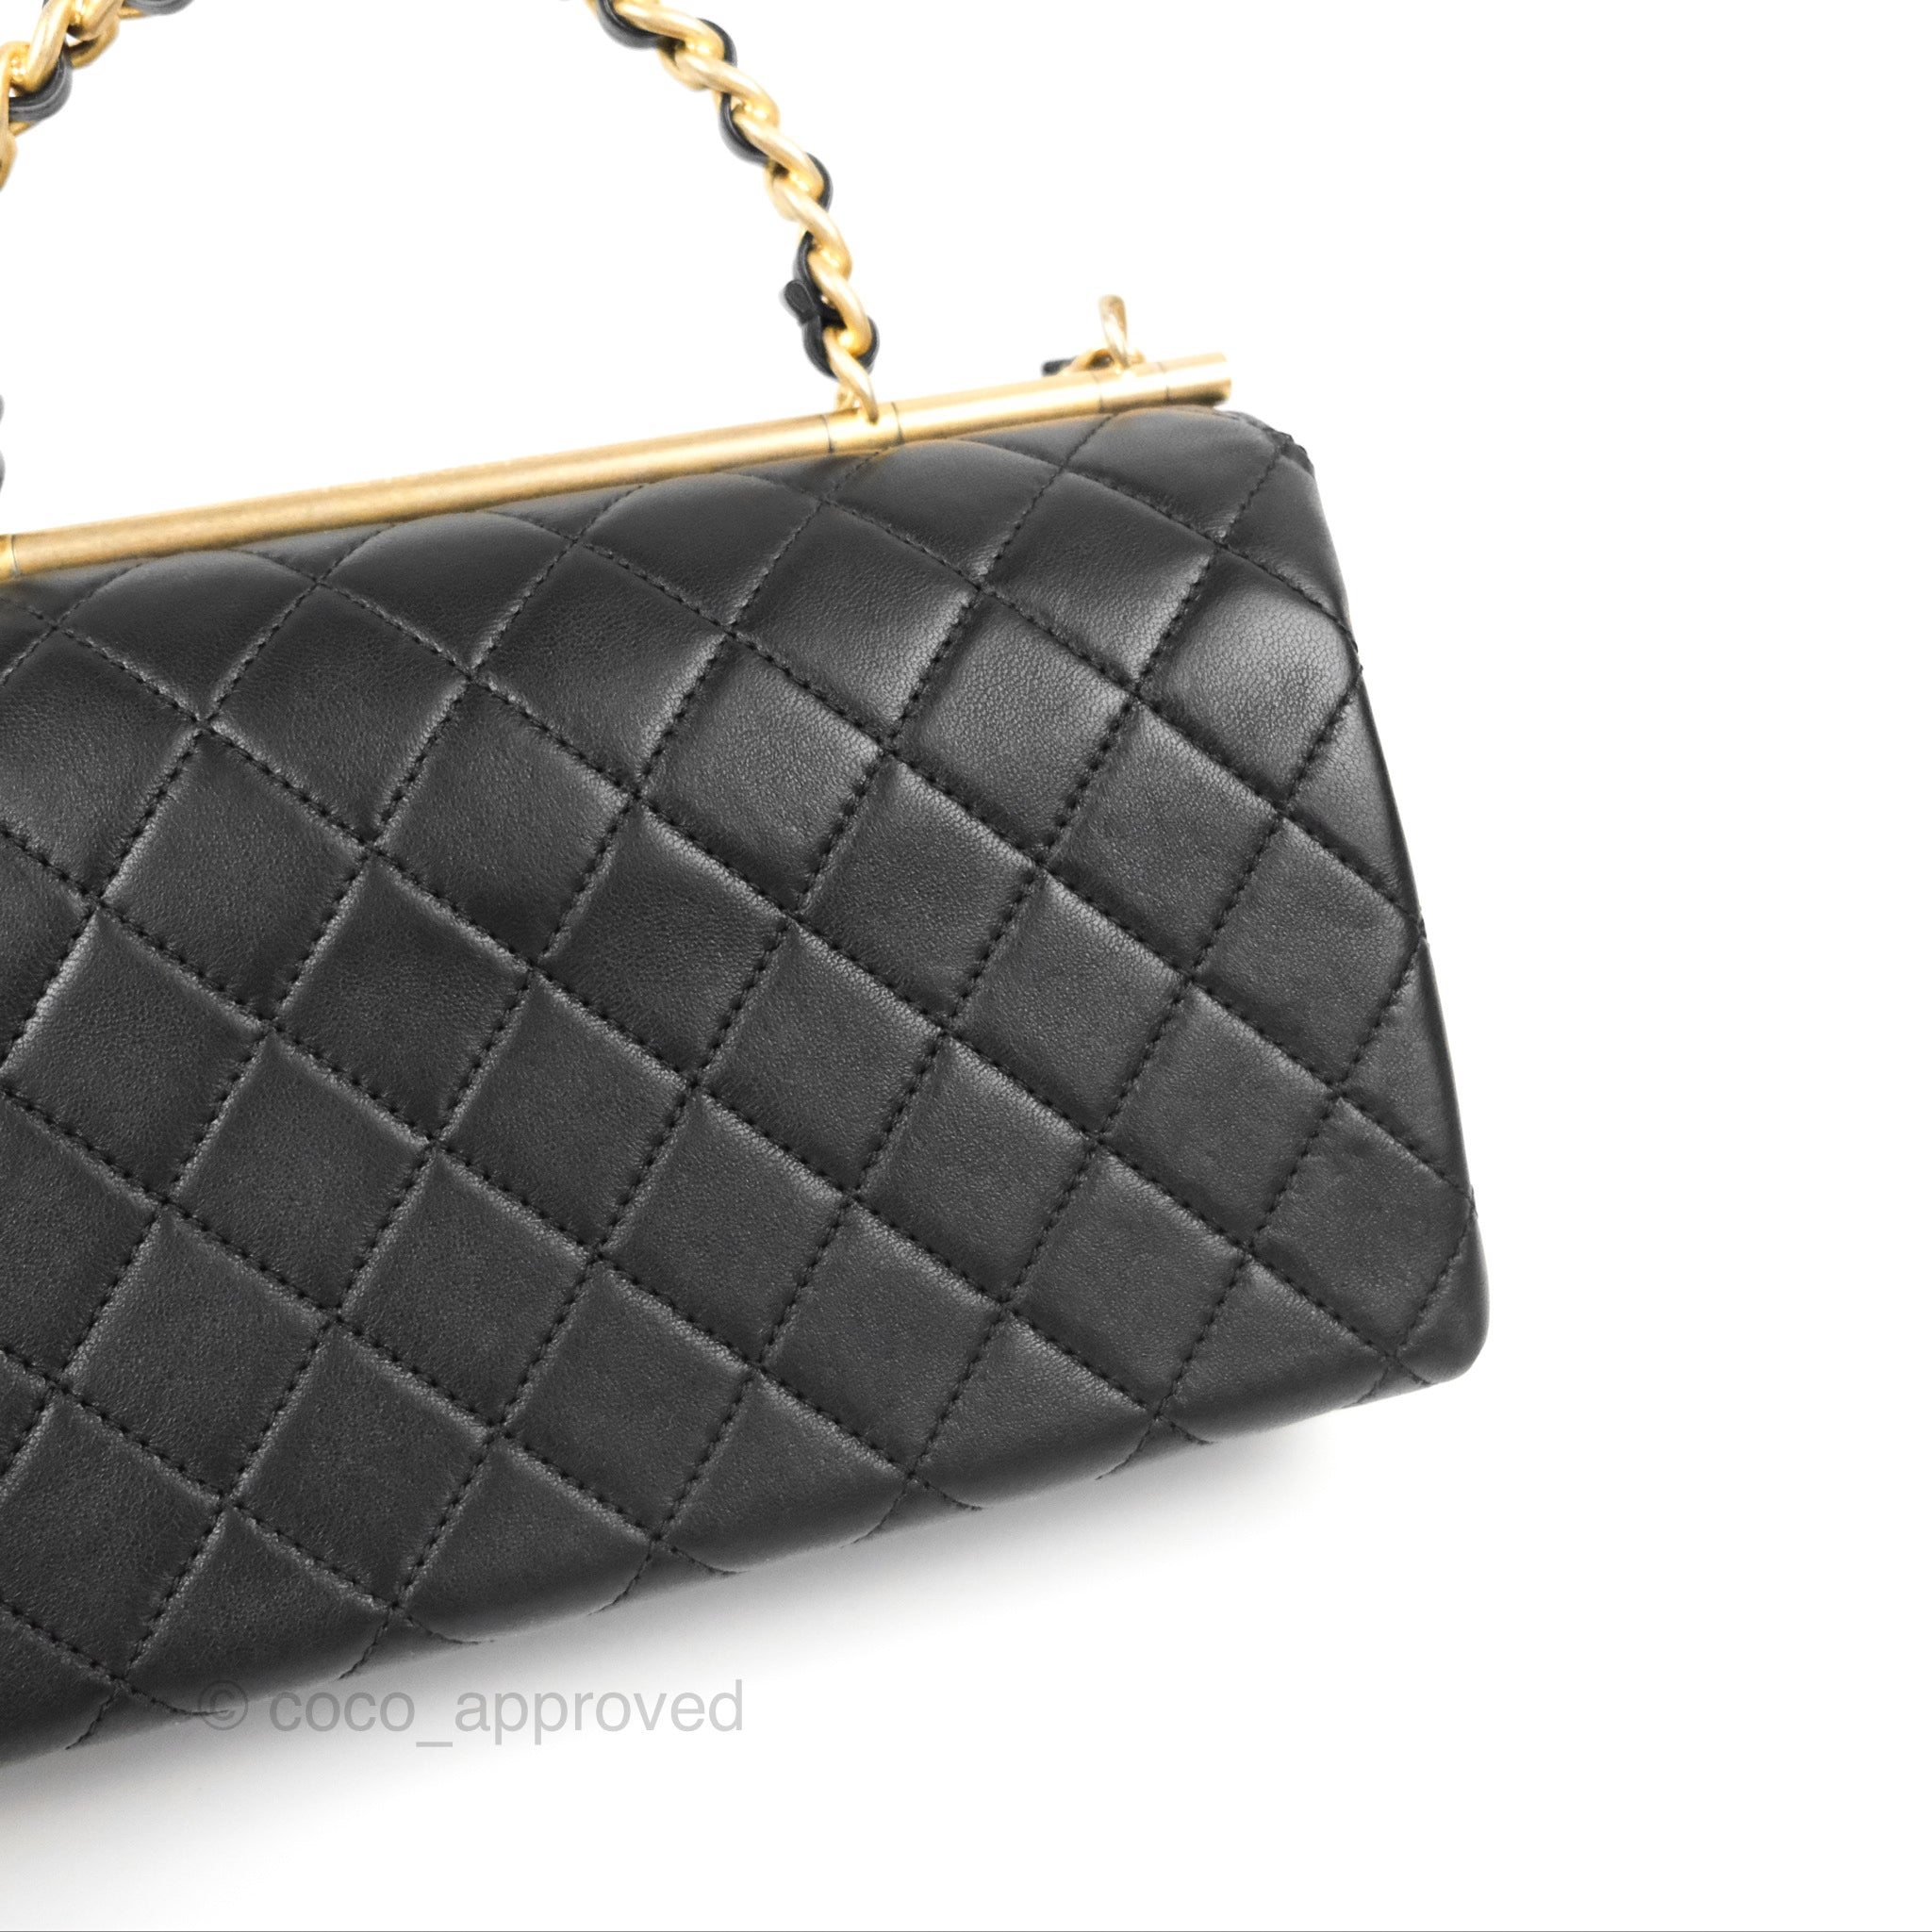 CHANEL Small Flap Bag With Top Handle